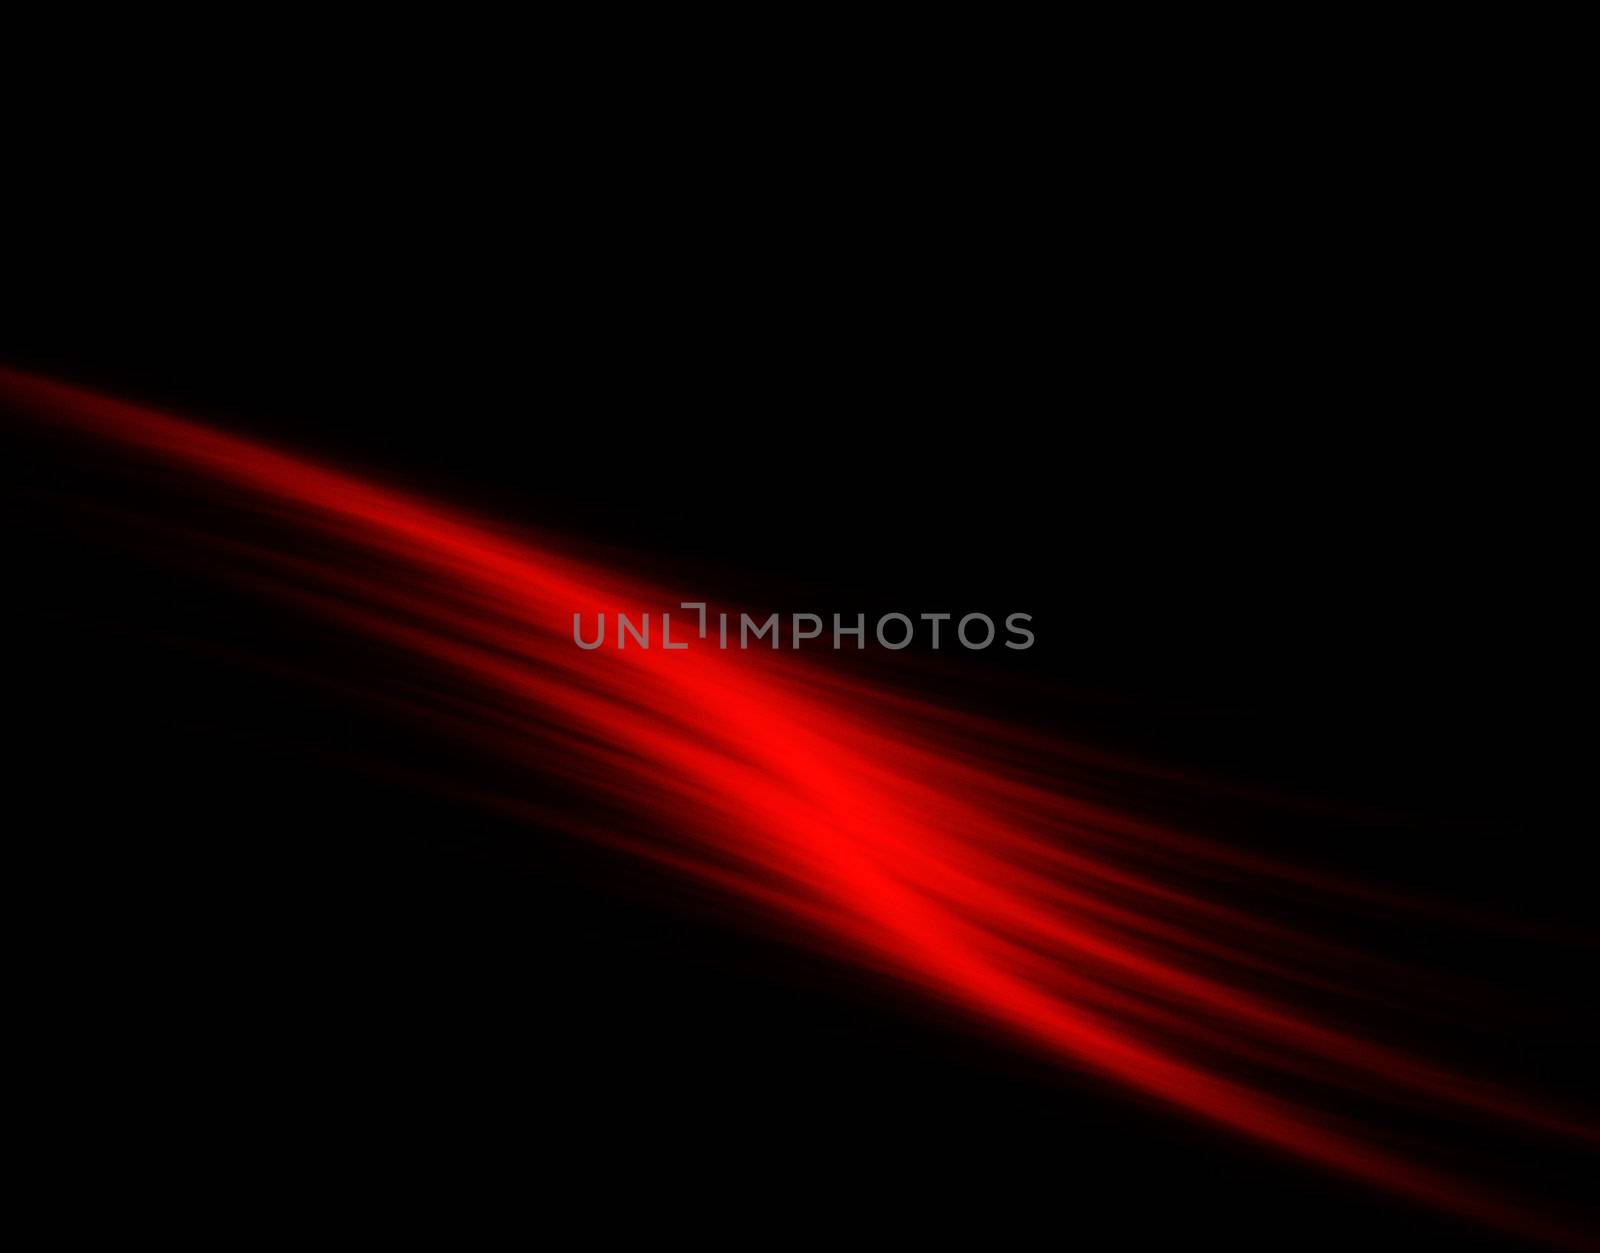 Red line, light, ray, beam crossing diagonal a black background, plenty of copy space 